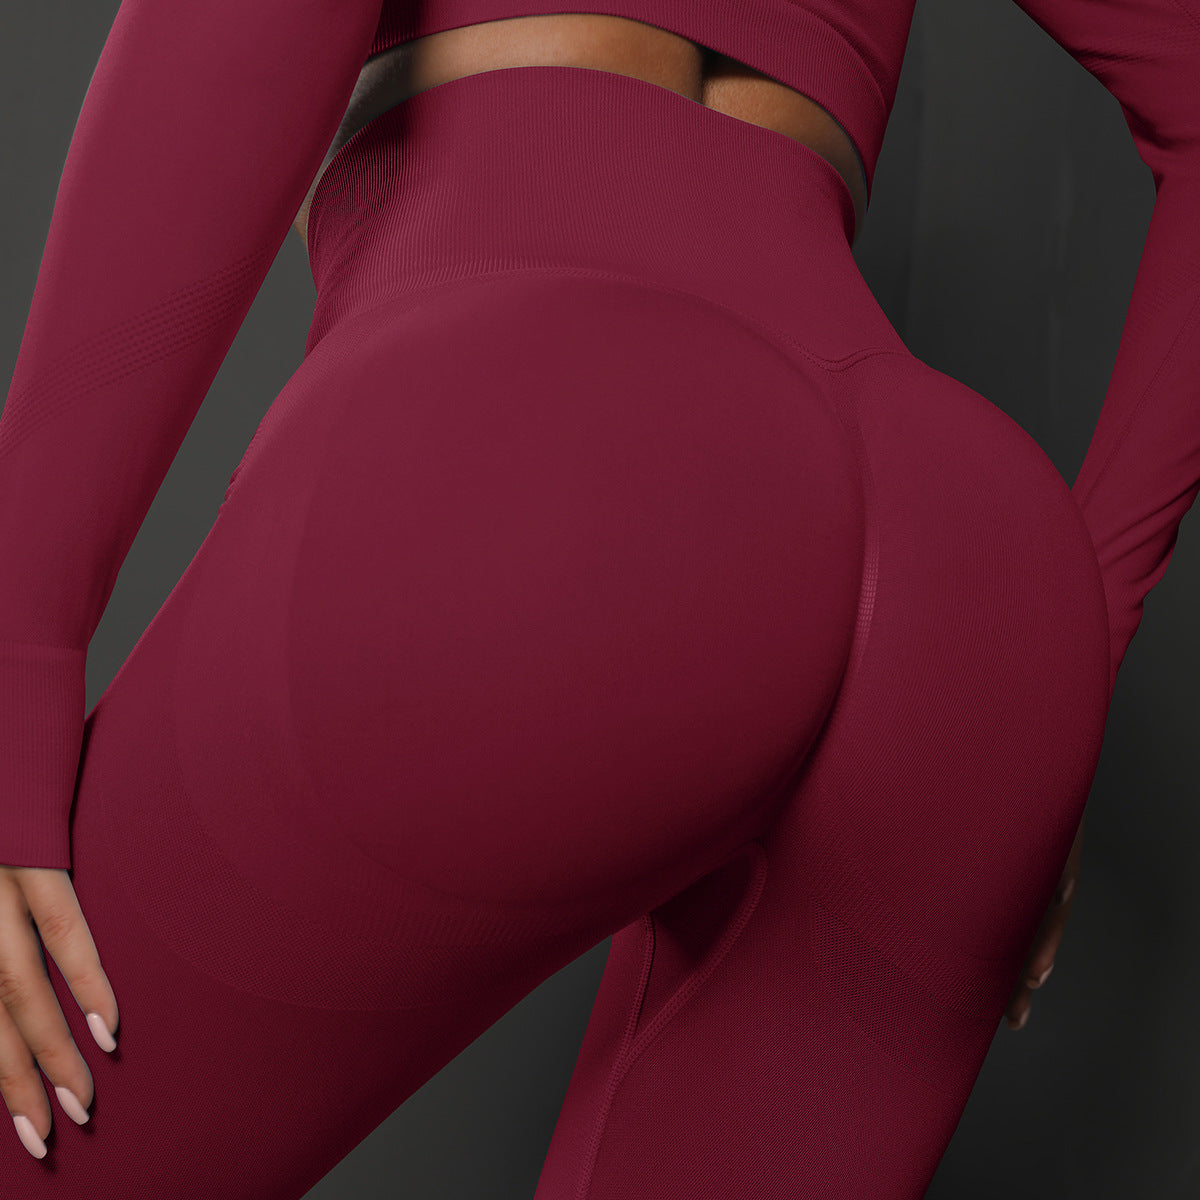 Sexy High Waist Yoga Sports Leggings-Activewear-Wine Red-S-Free Shipping Leatheretro